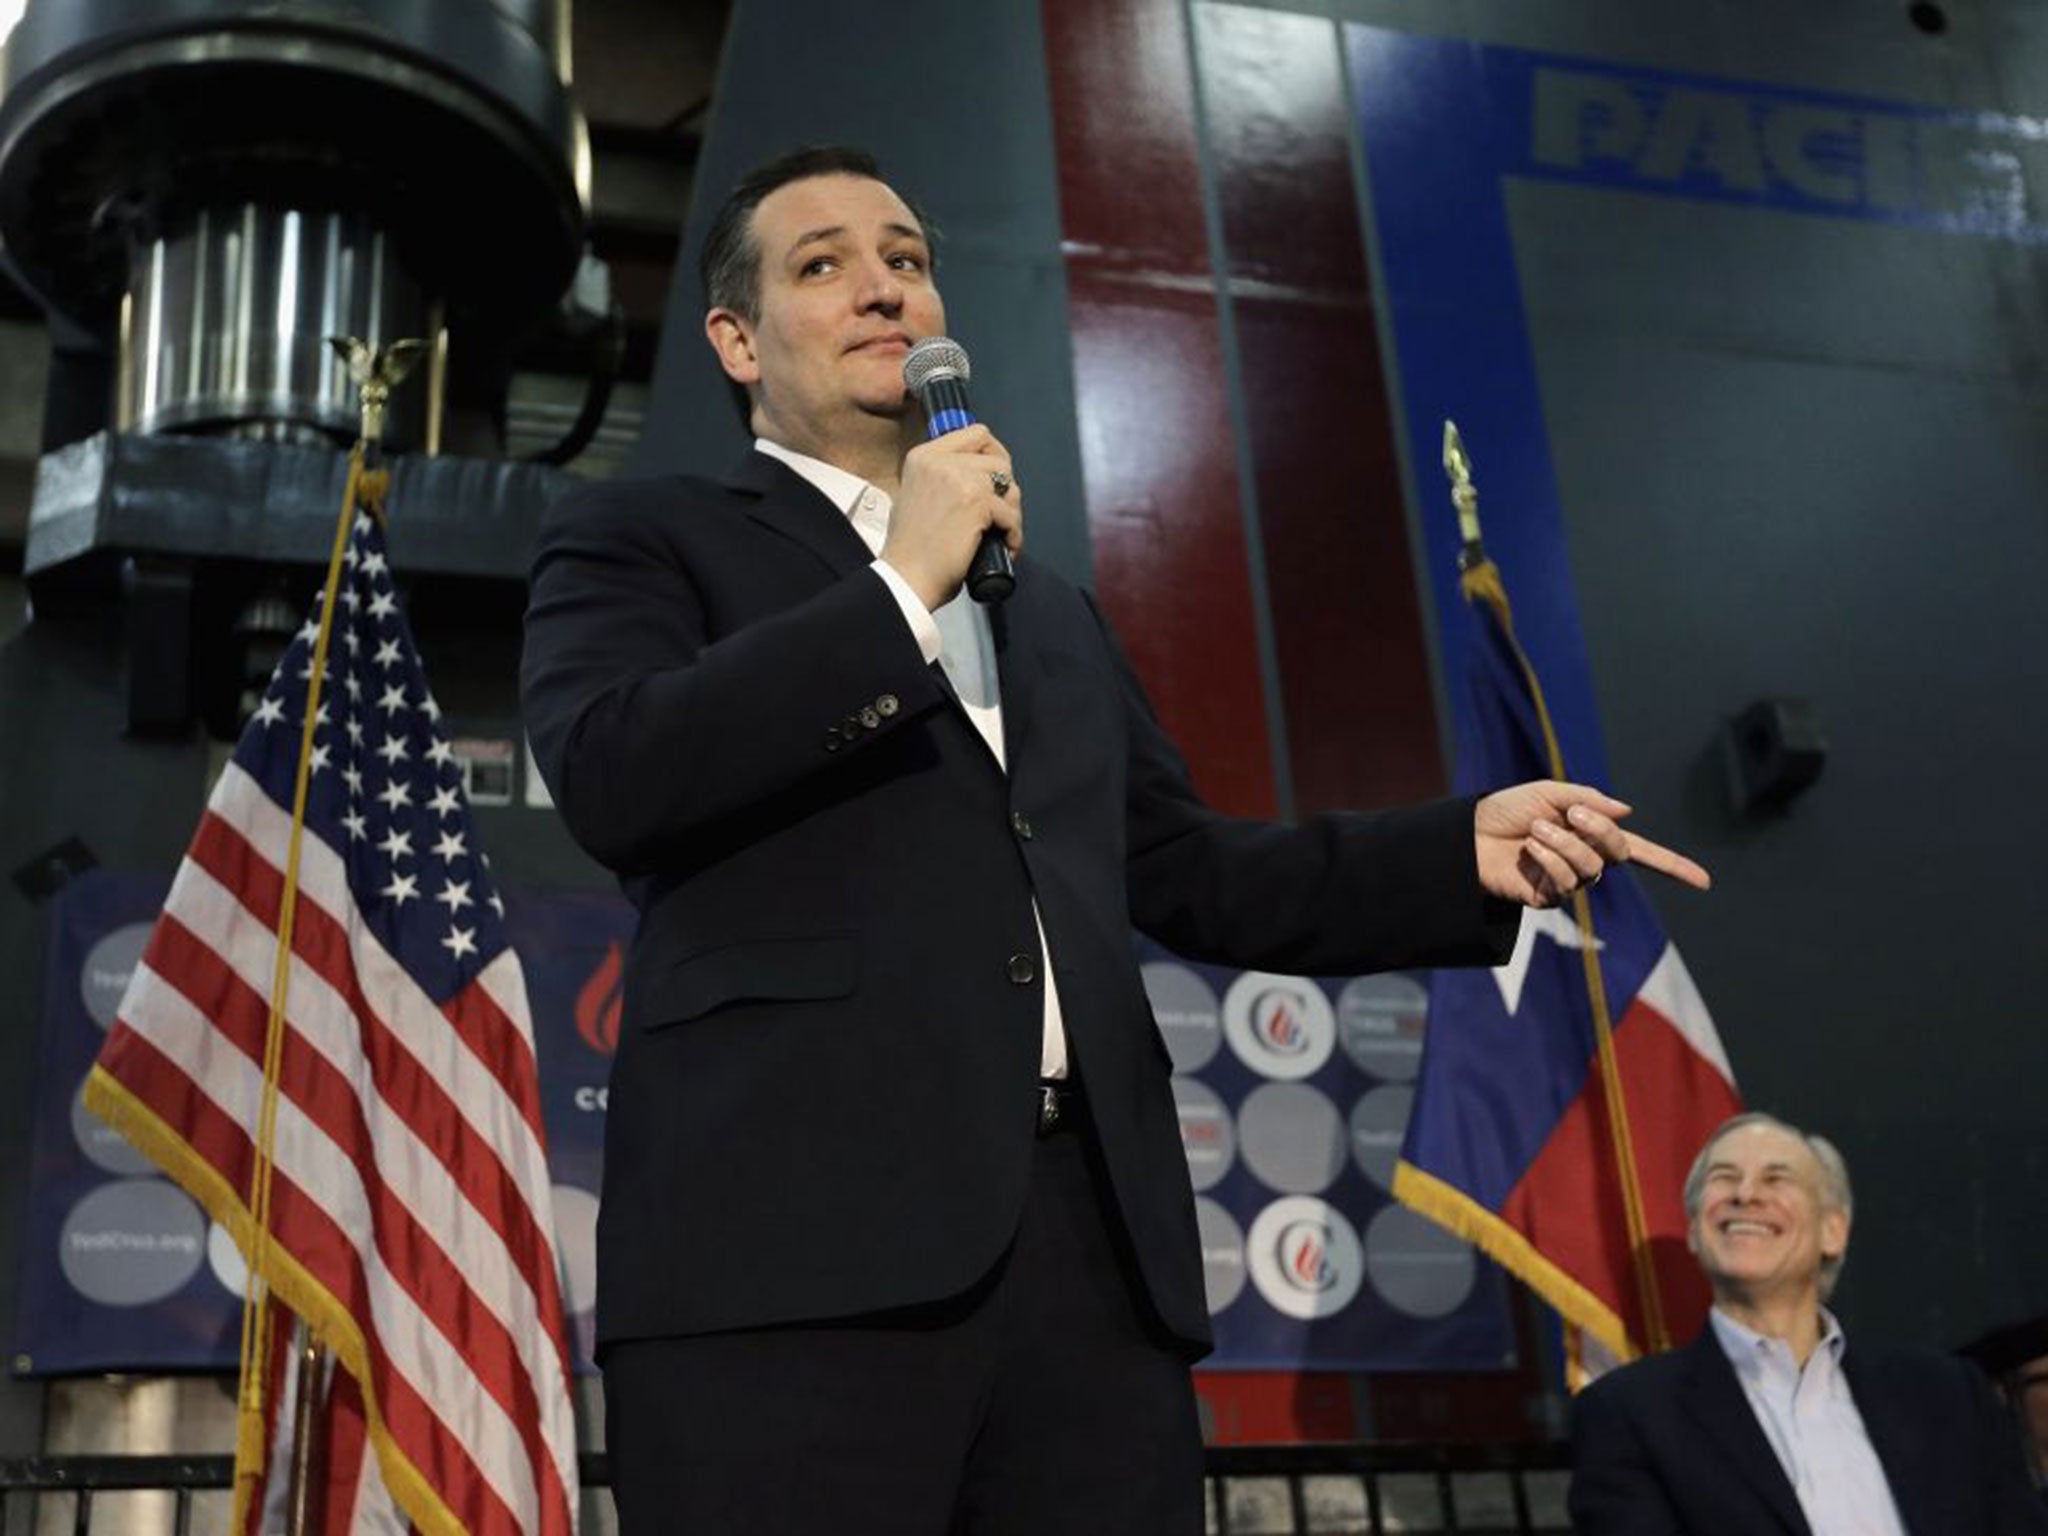 Ted Cruz speaks at a rally in Houston, accompanied by Texas governor Greg Abbott